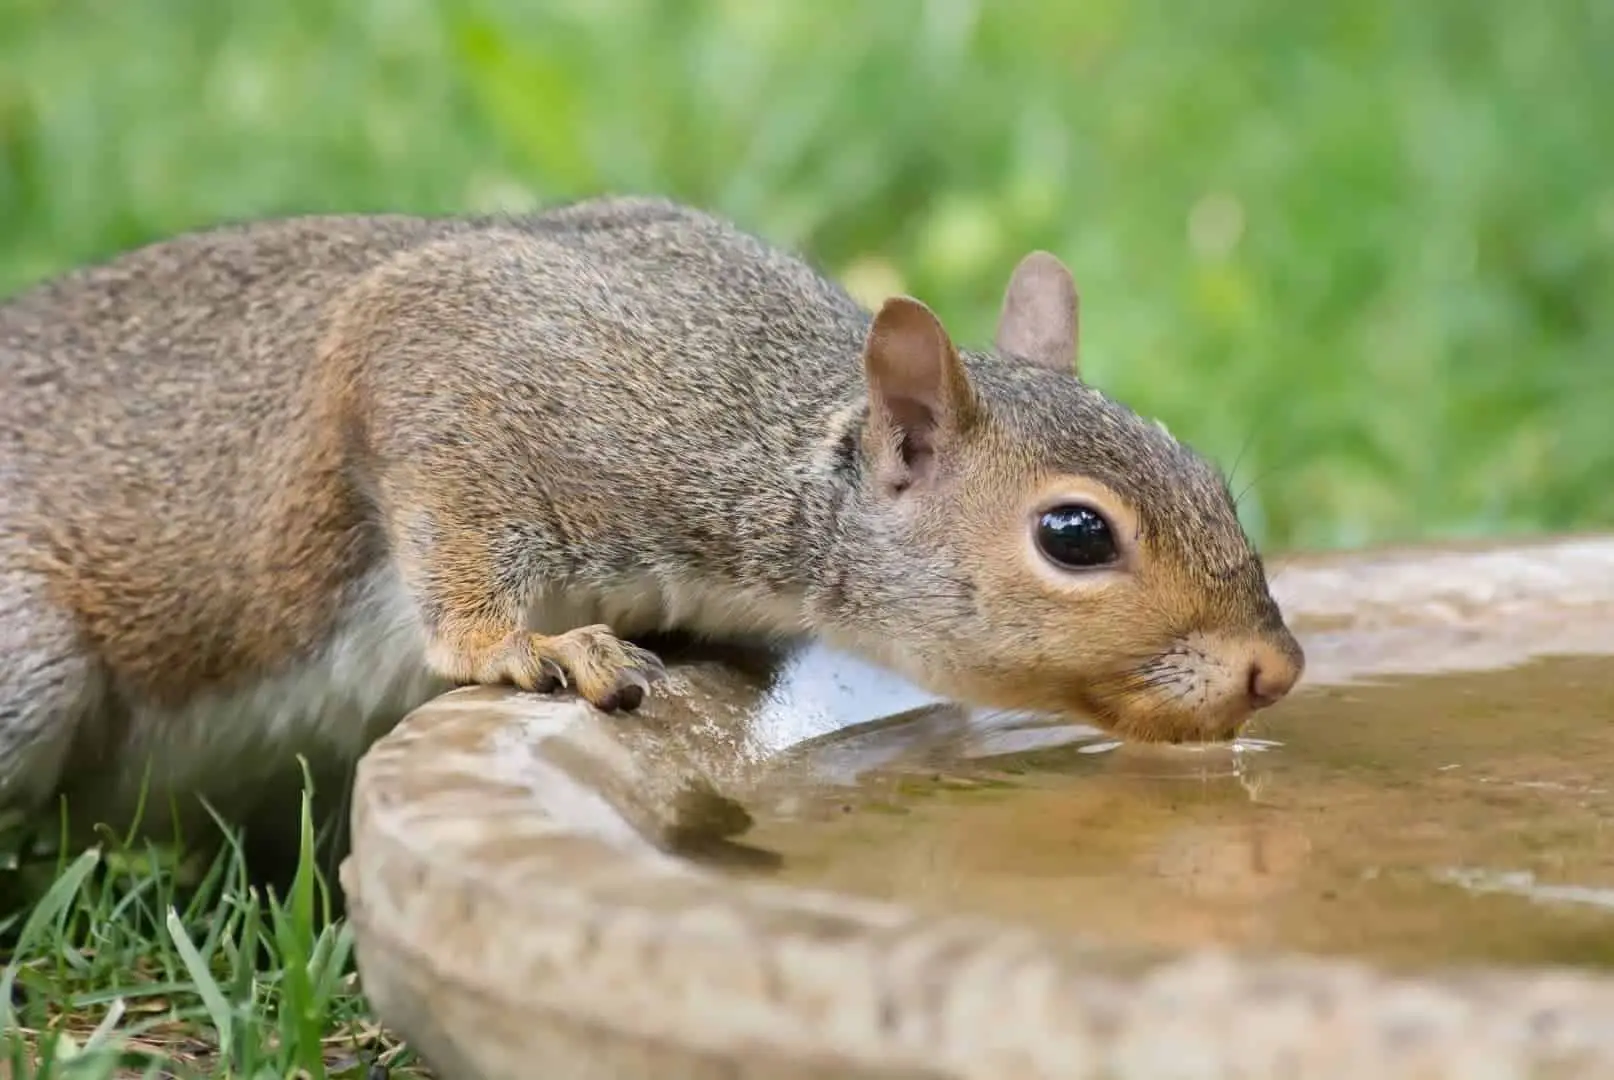 Curling Tongue! How Do Squirrels Drink Water? (Photos + Videos)